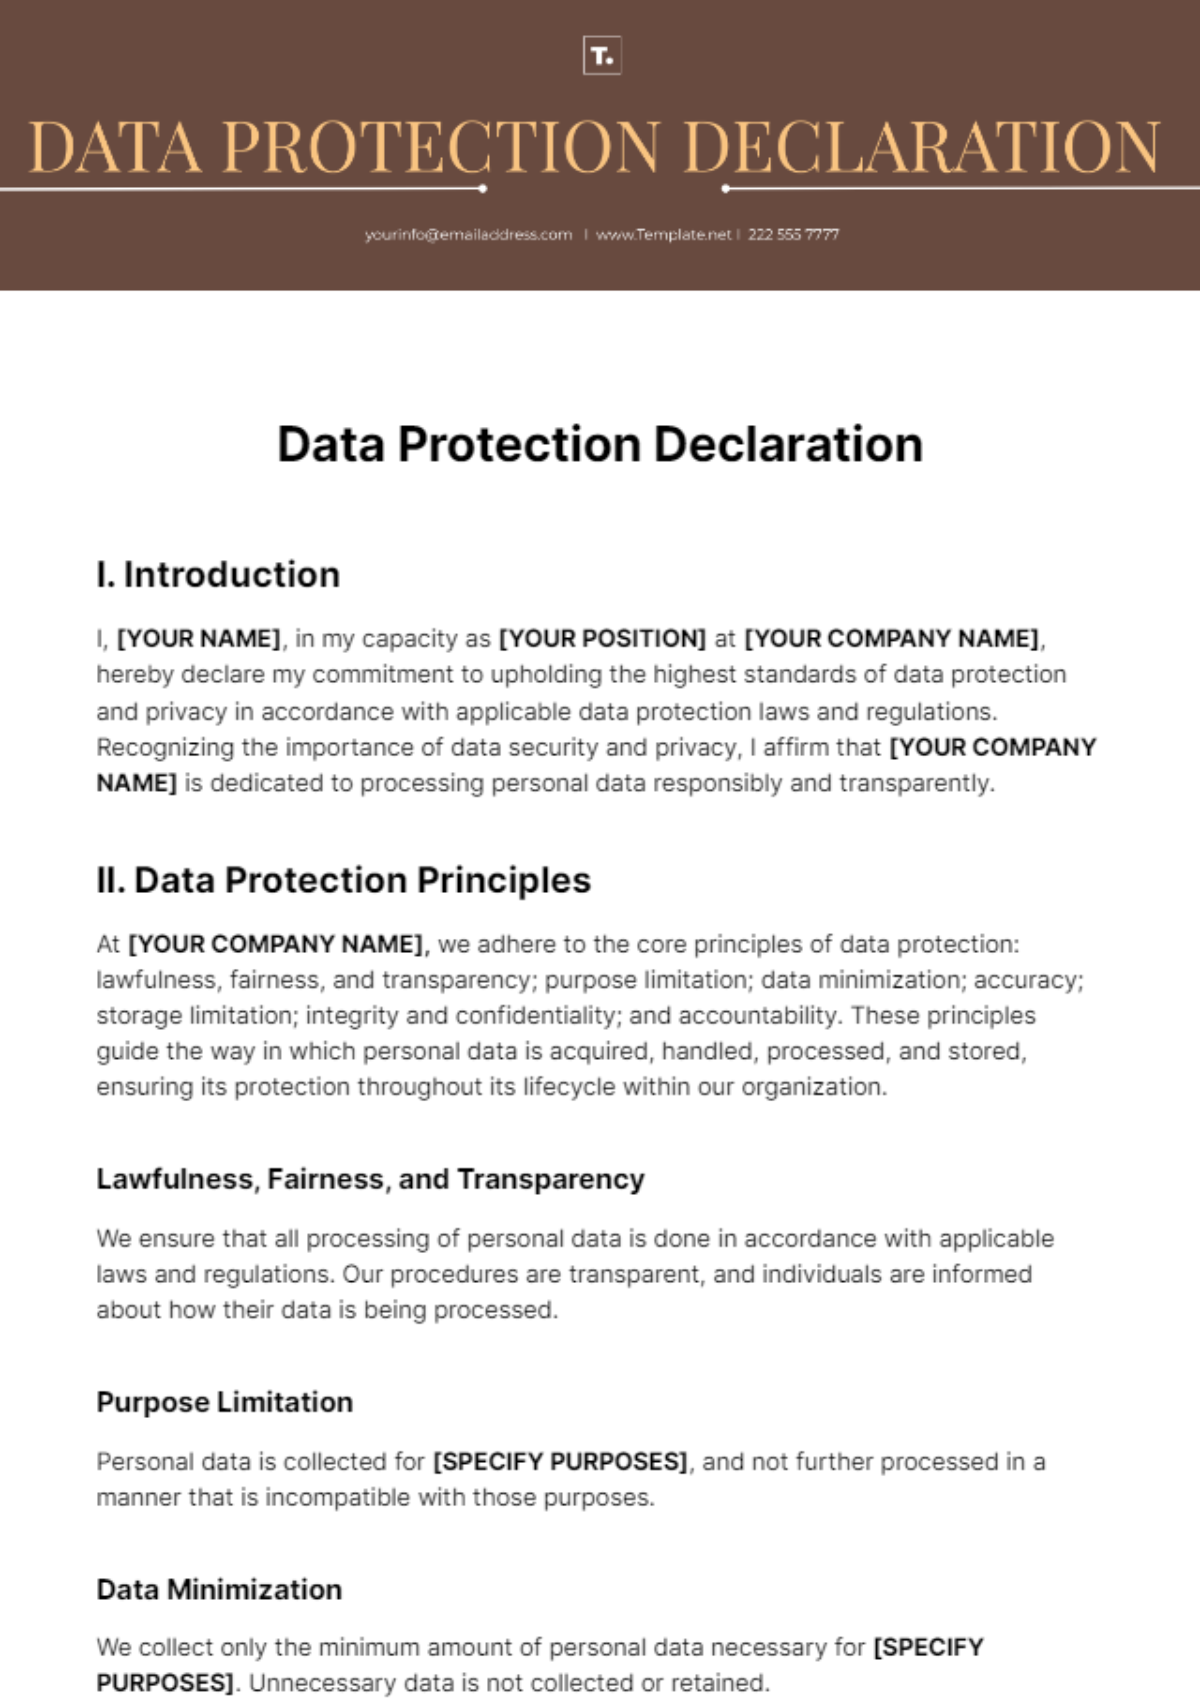 Data Protection Declaration Template